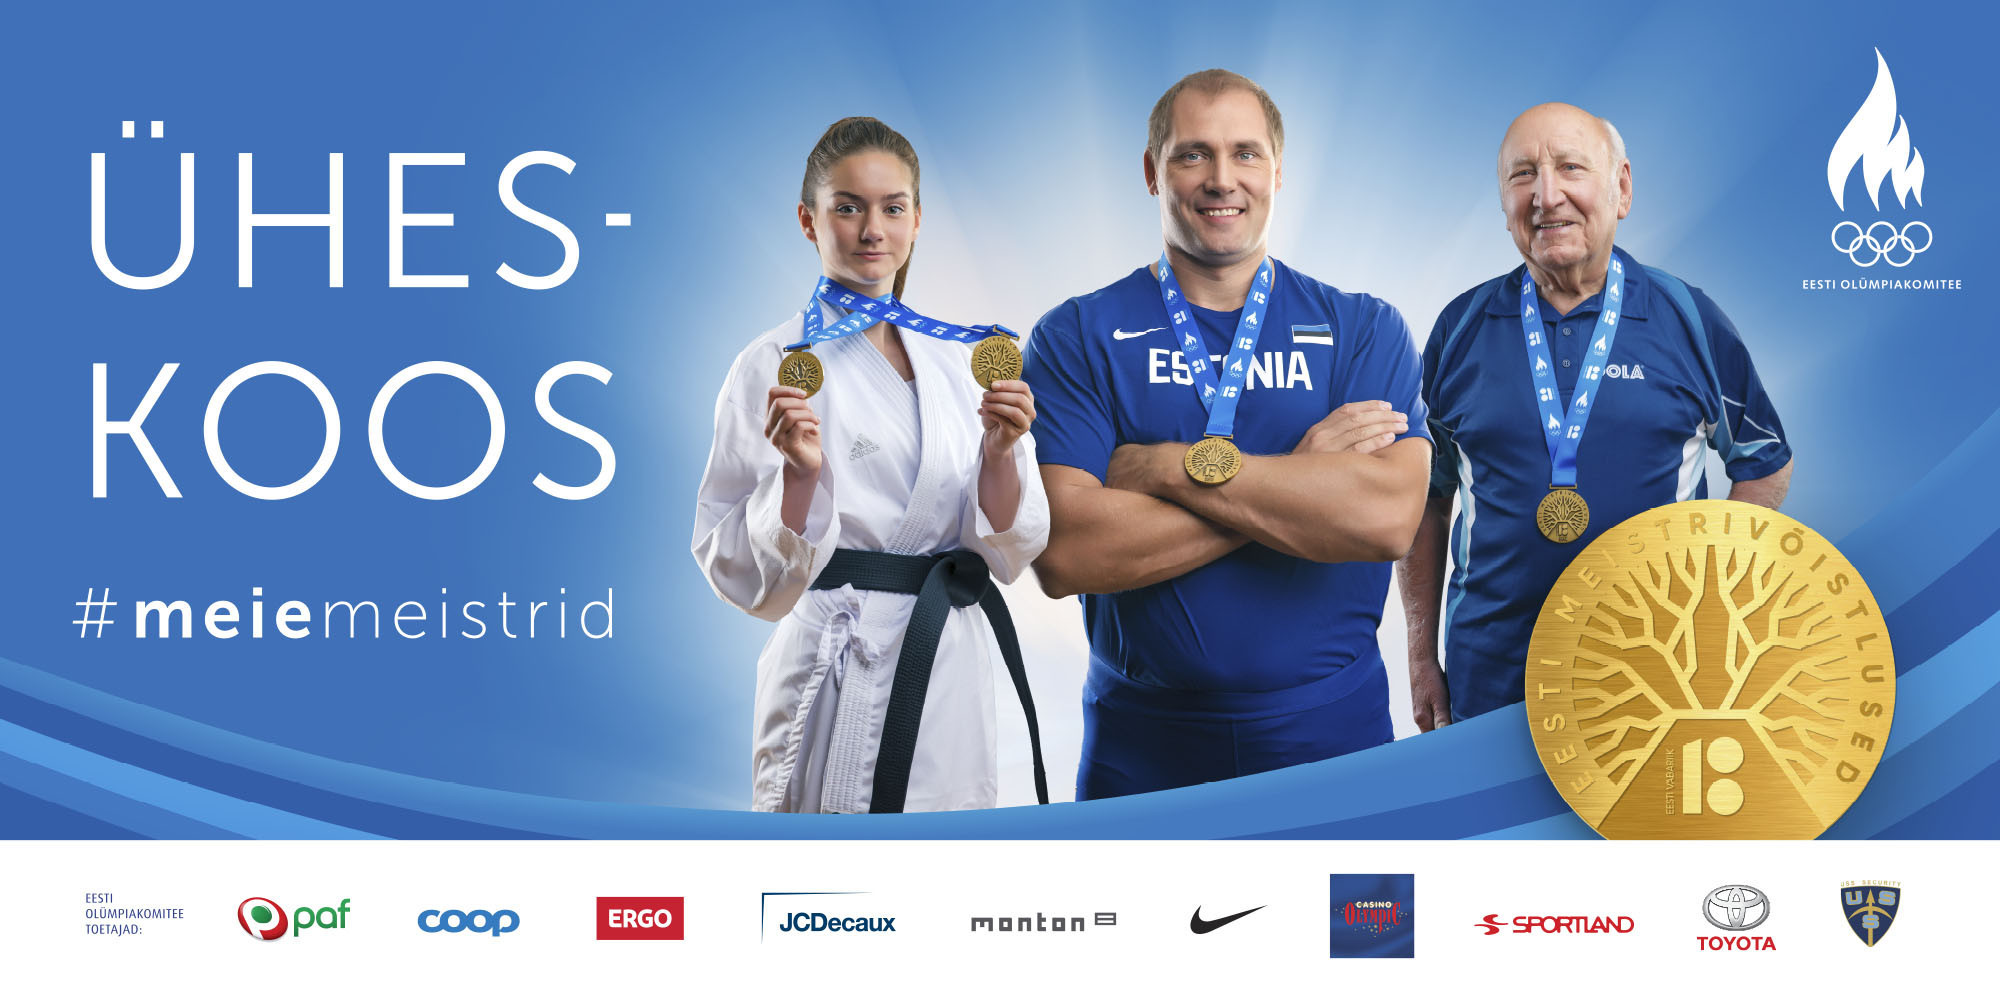 The Estonian Olympic Committee has launched a campaign which will see all national champions in 2018 awarded an identical medal ©EOK